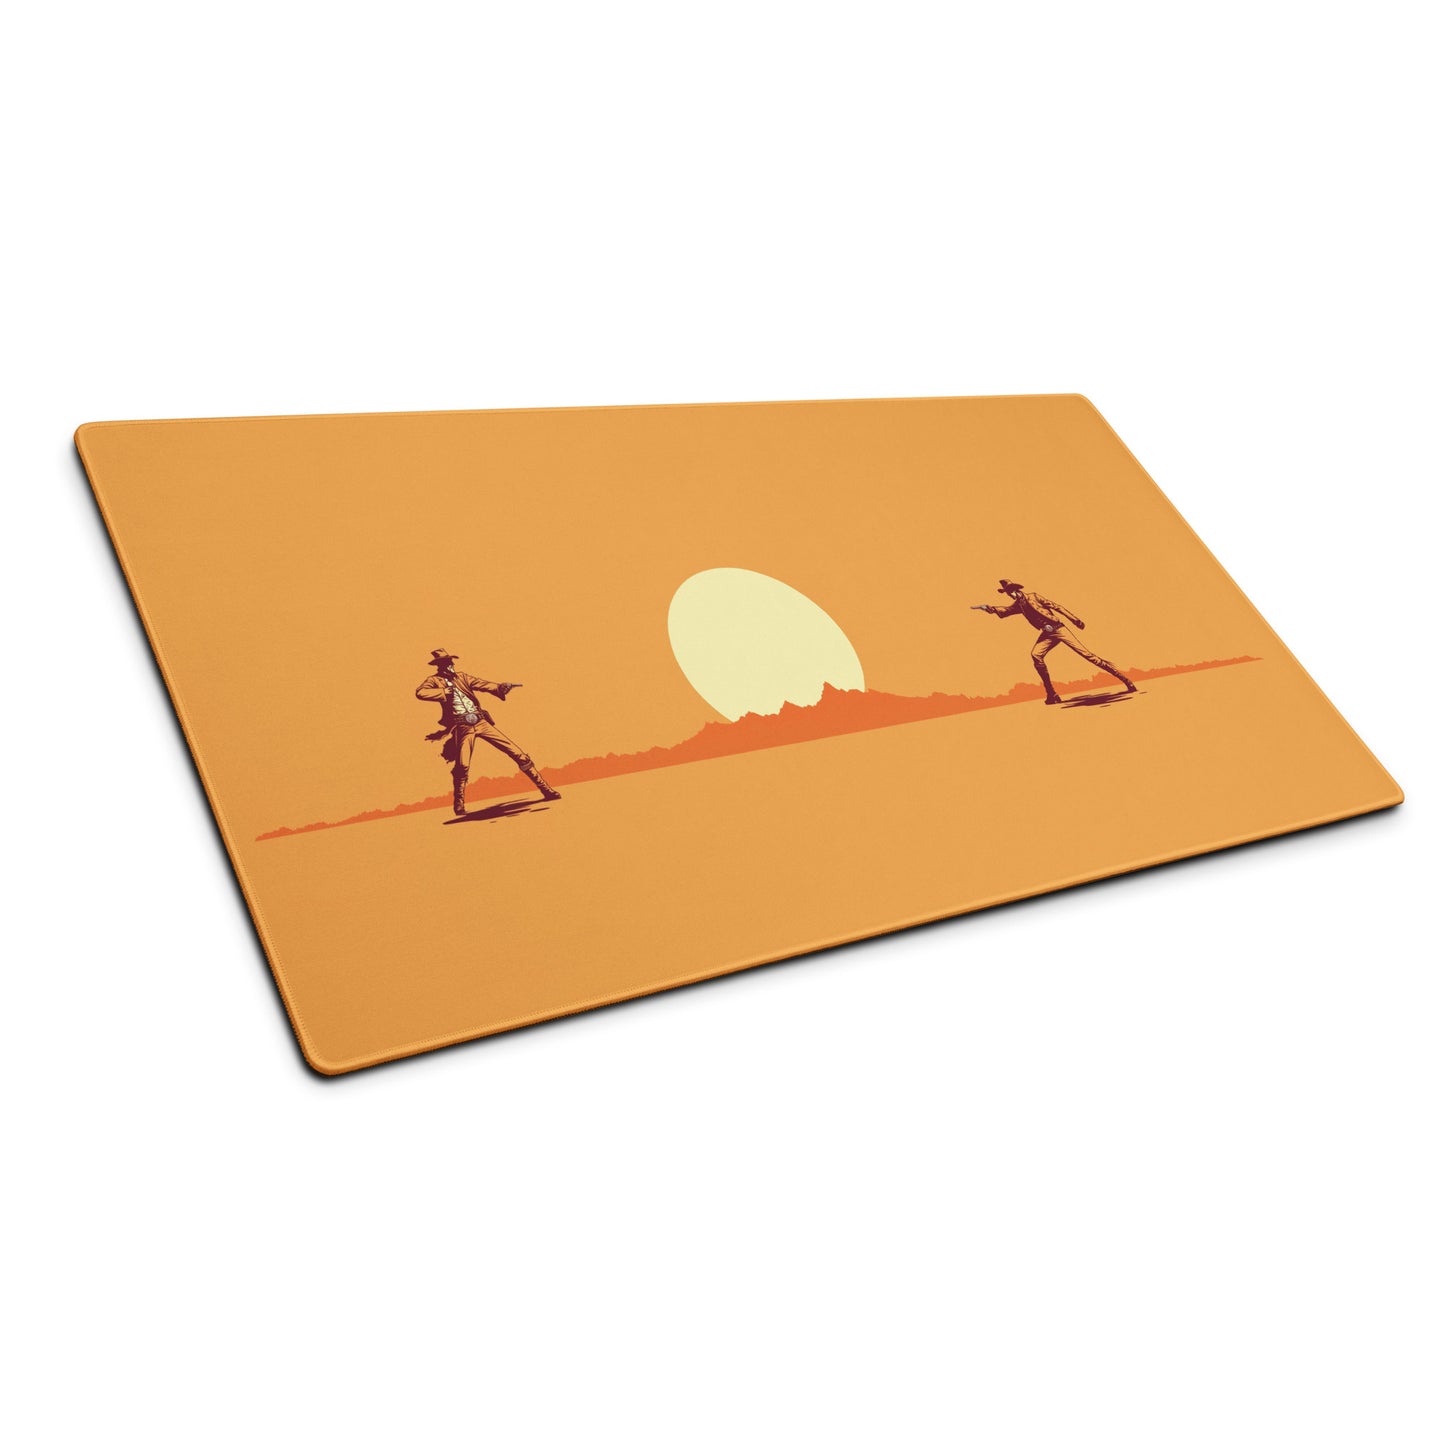 An orange 36" x 18" desk pad with cowboys dueling sitting at an angle.